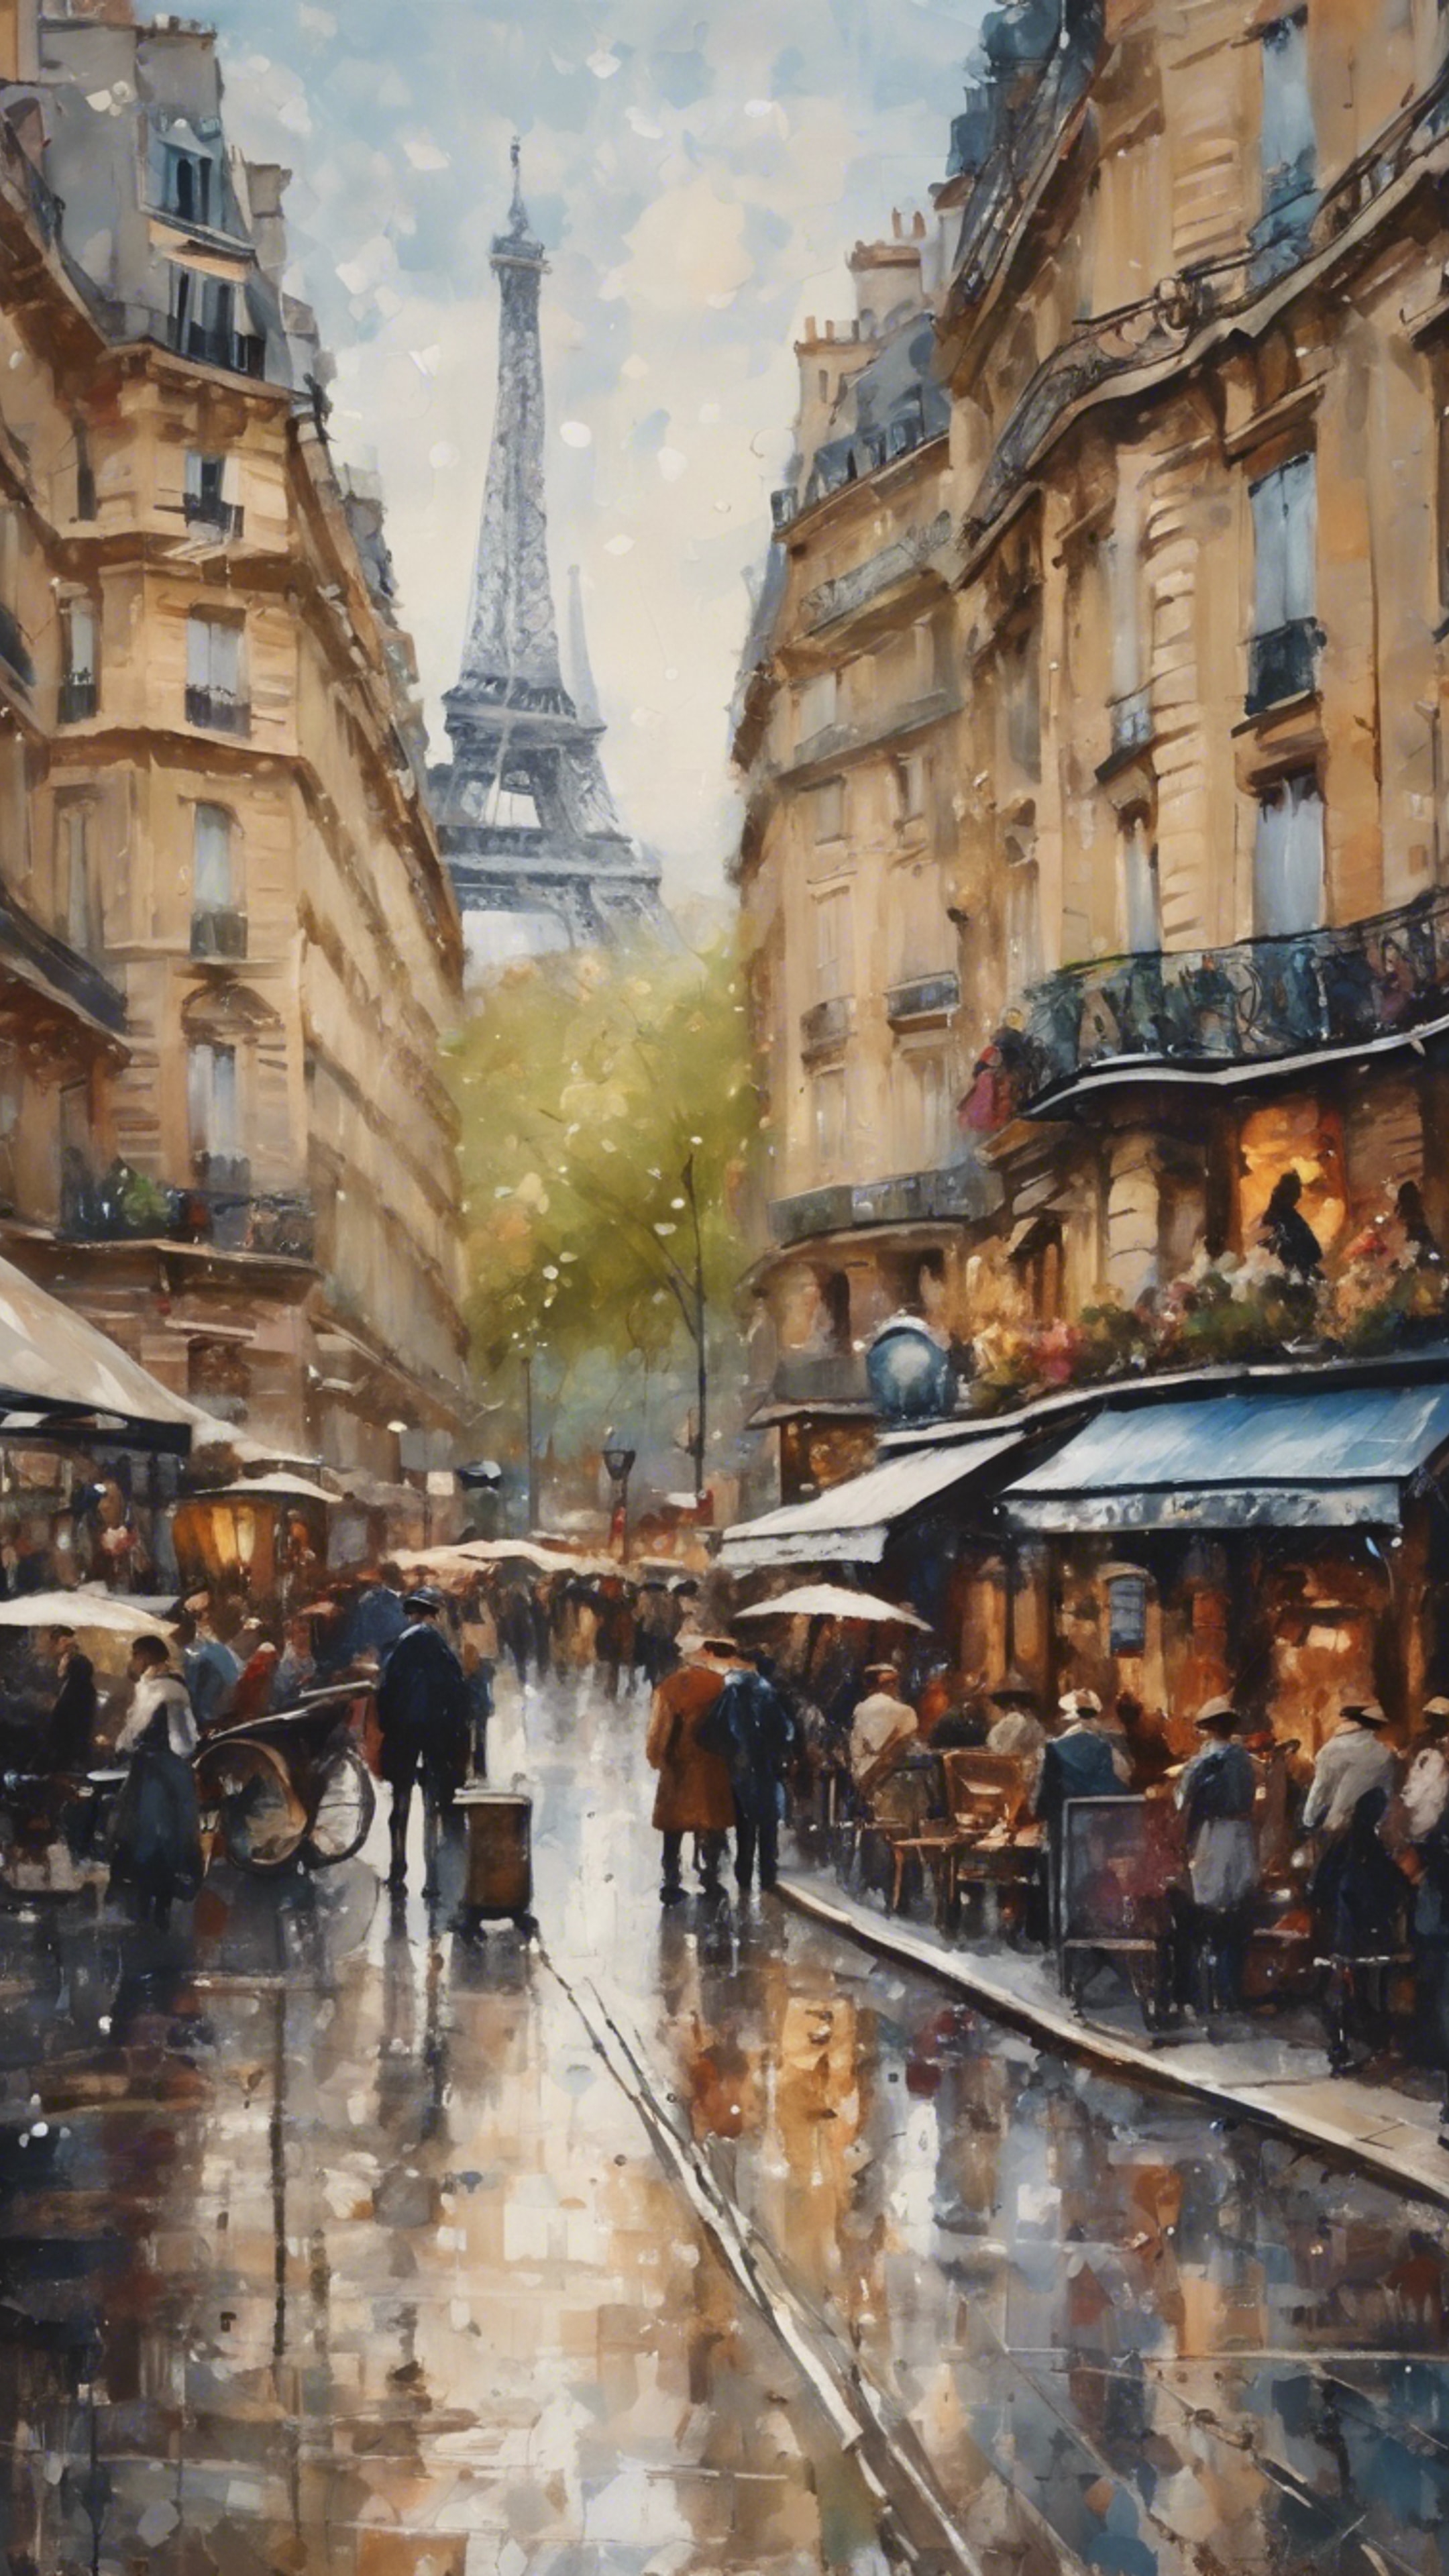 An impressionistic painting of a bustling Parisian street in the 19th century.壁紙[cd696b103ef84e098ff4]